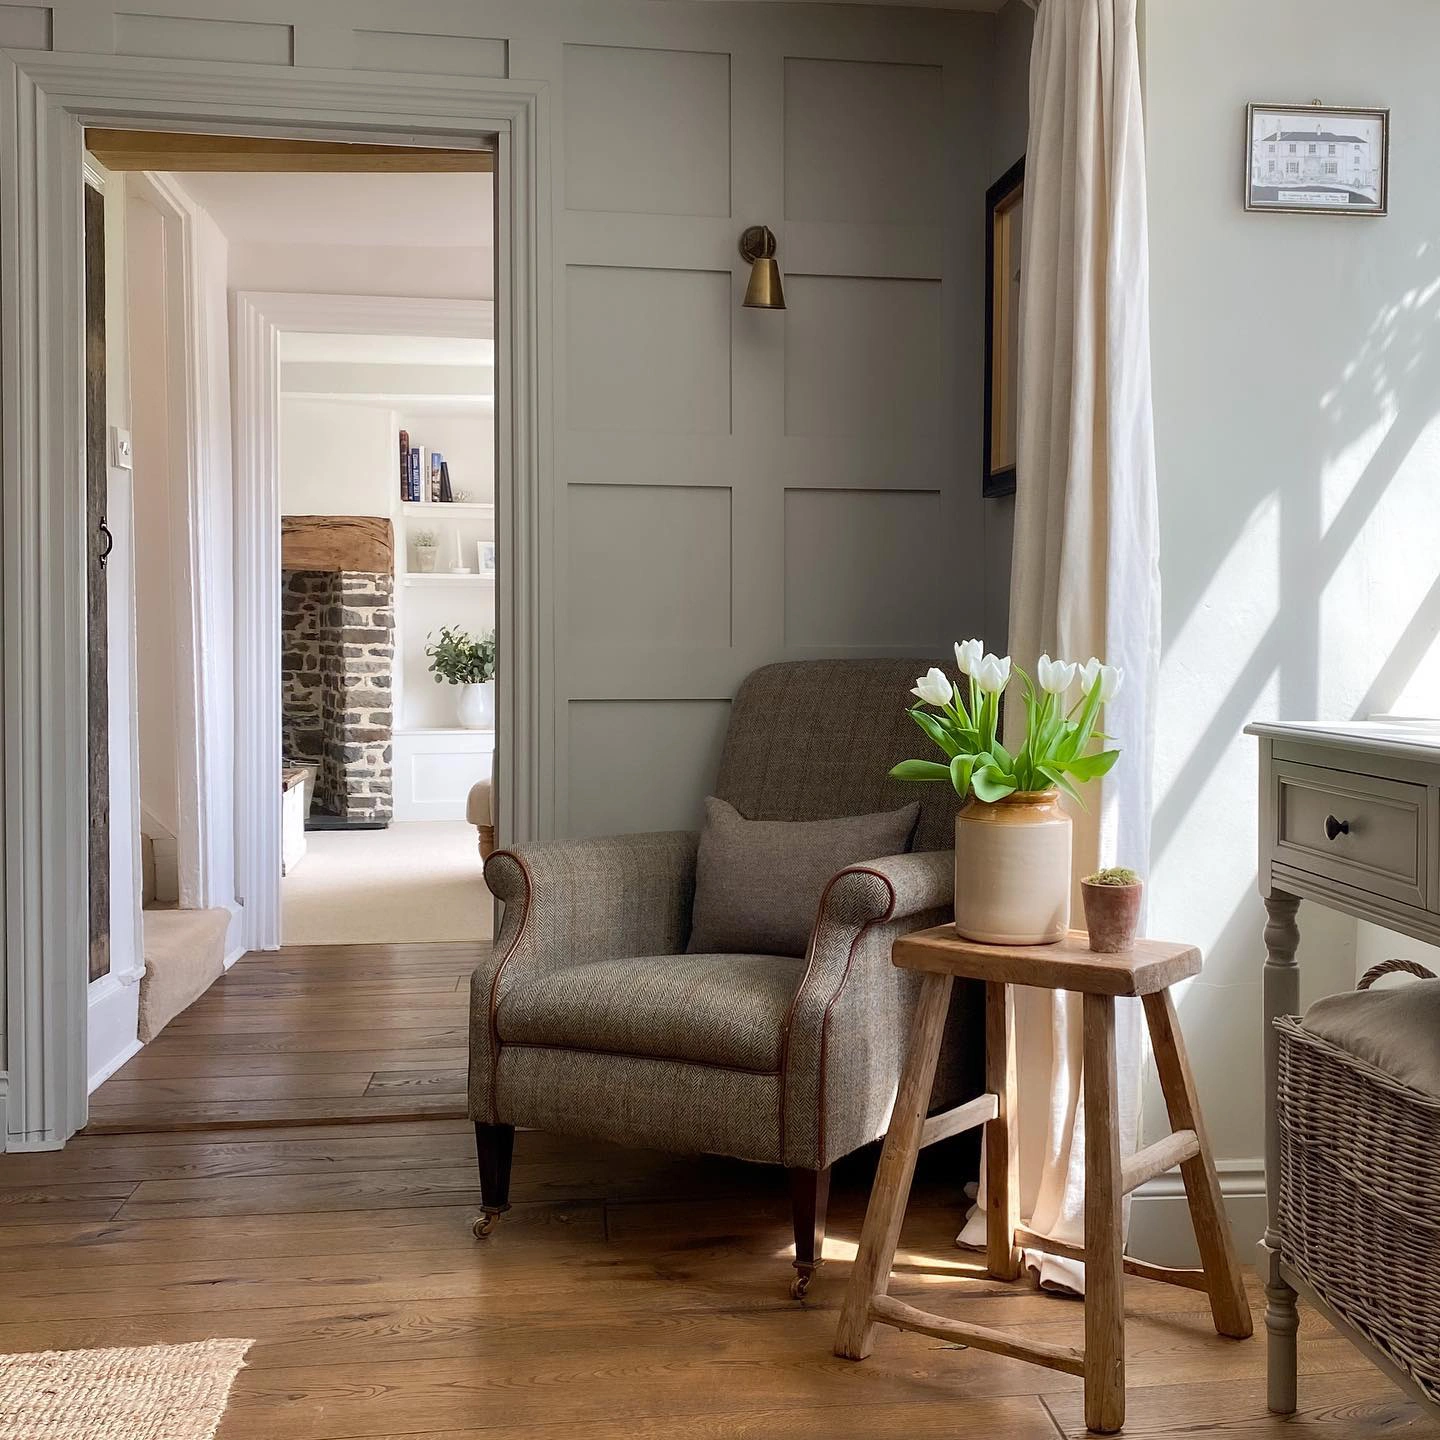 Farrow and Ball Lamp Room Gray review on accent panelled wall